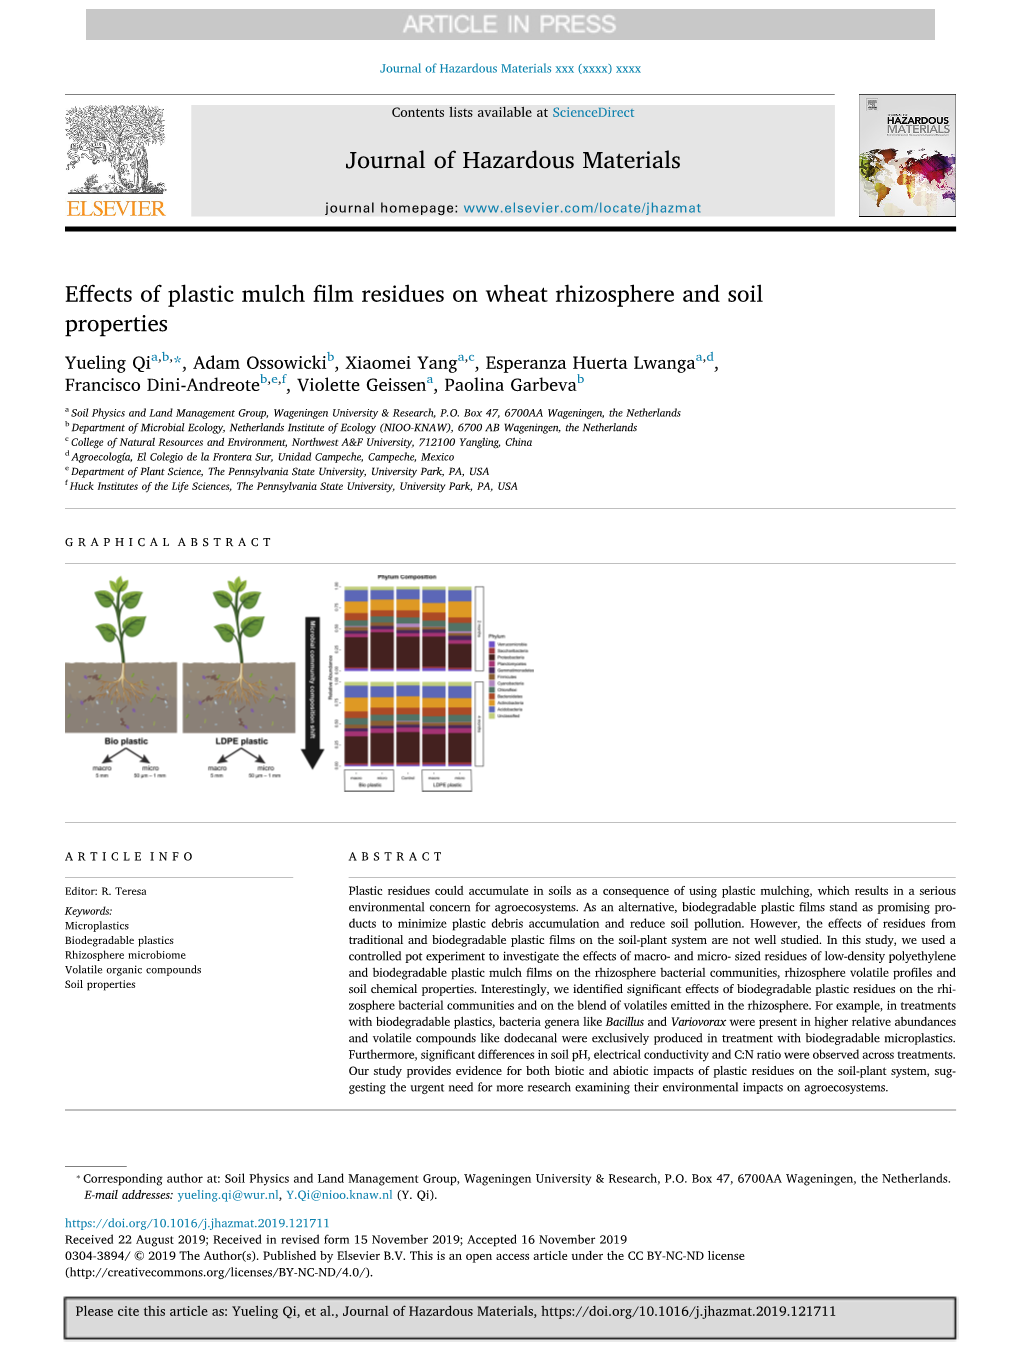 Effects of Plastic Mulch Film Residues on Wheat Rhizosphere and Soil